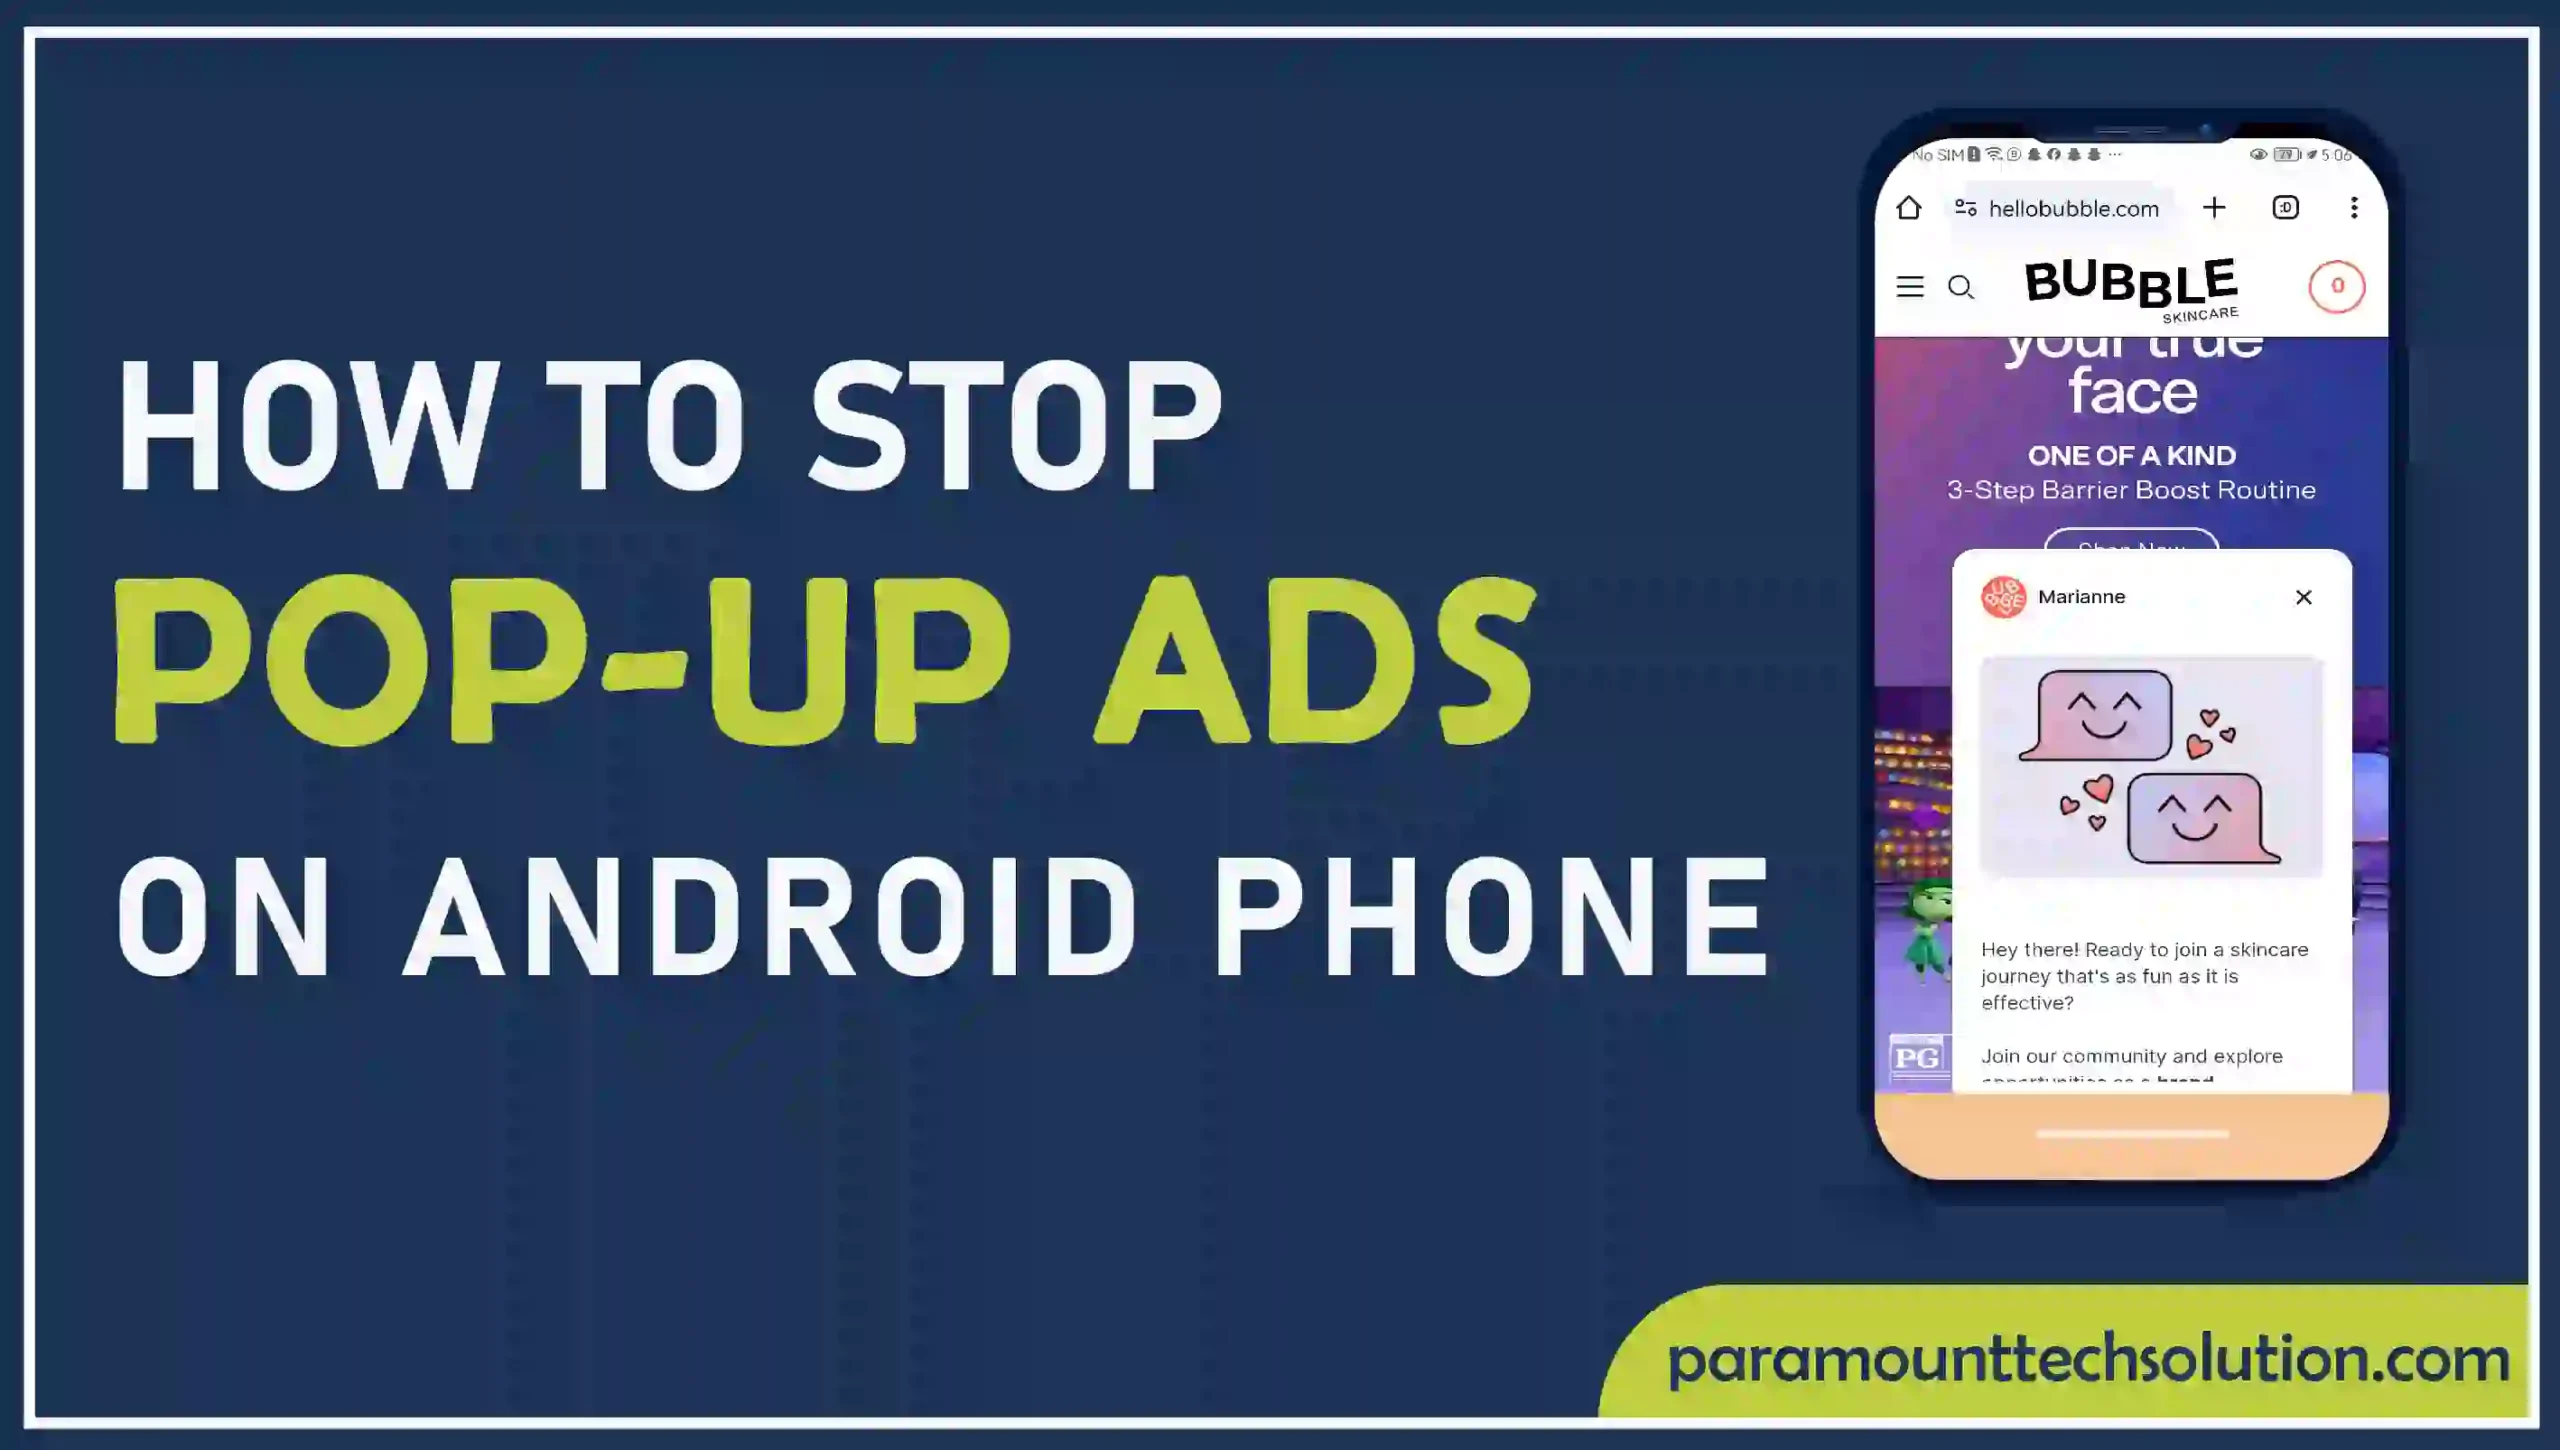 How to stop pop-up ads on Android phone